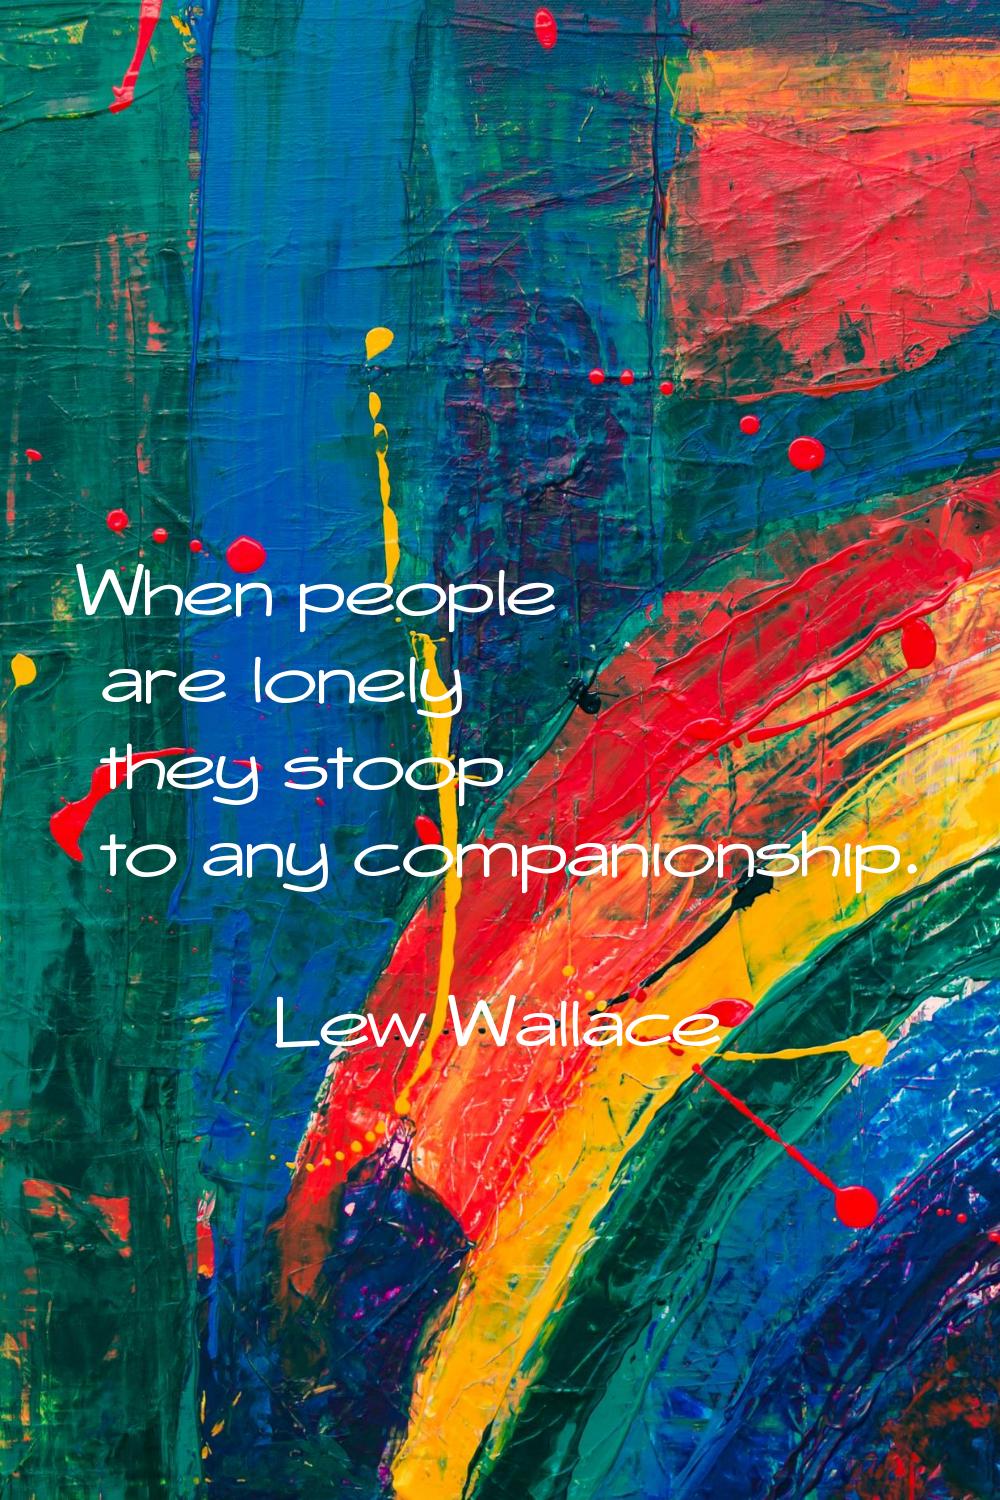 When people are lonely they stoop to any companionship.